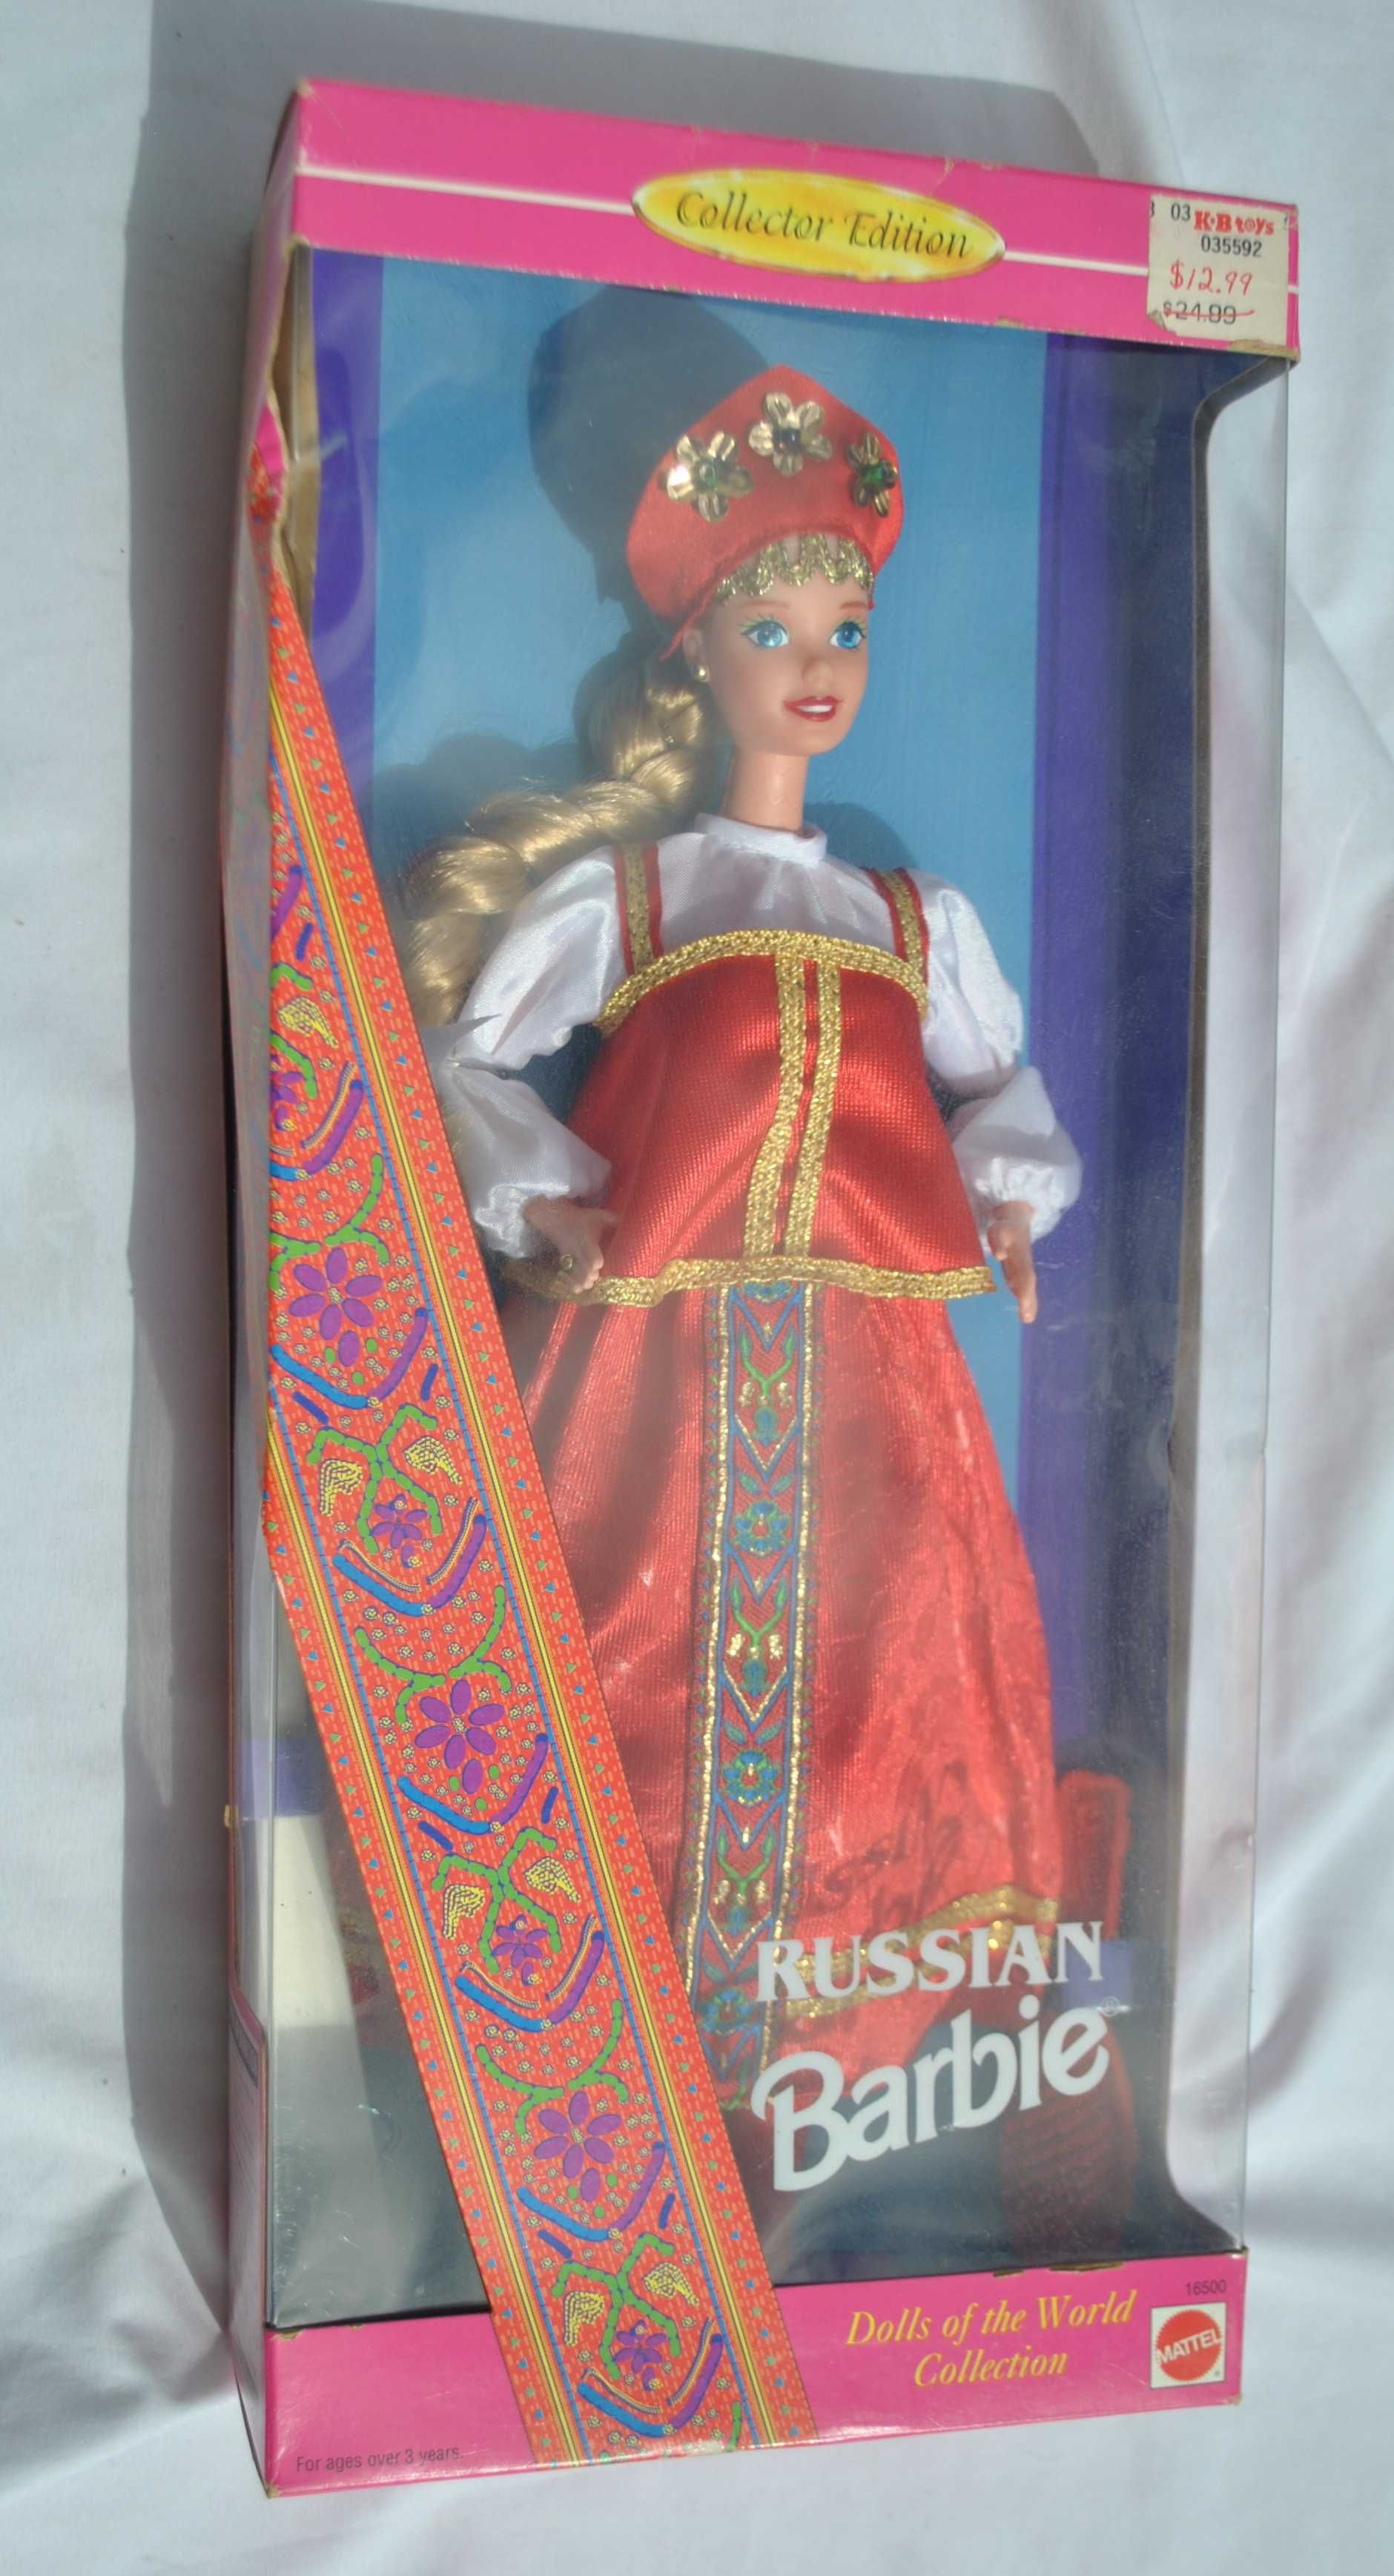 lalka barbie RUSSIAN dolls of the world collection 1996